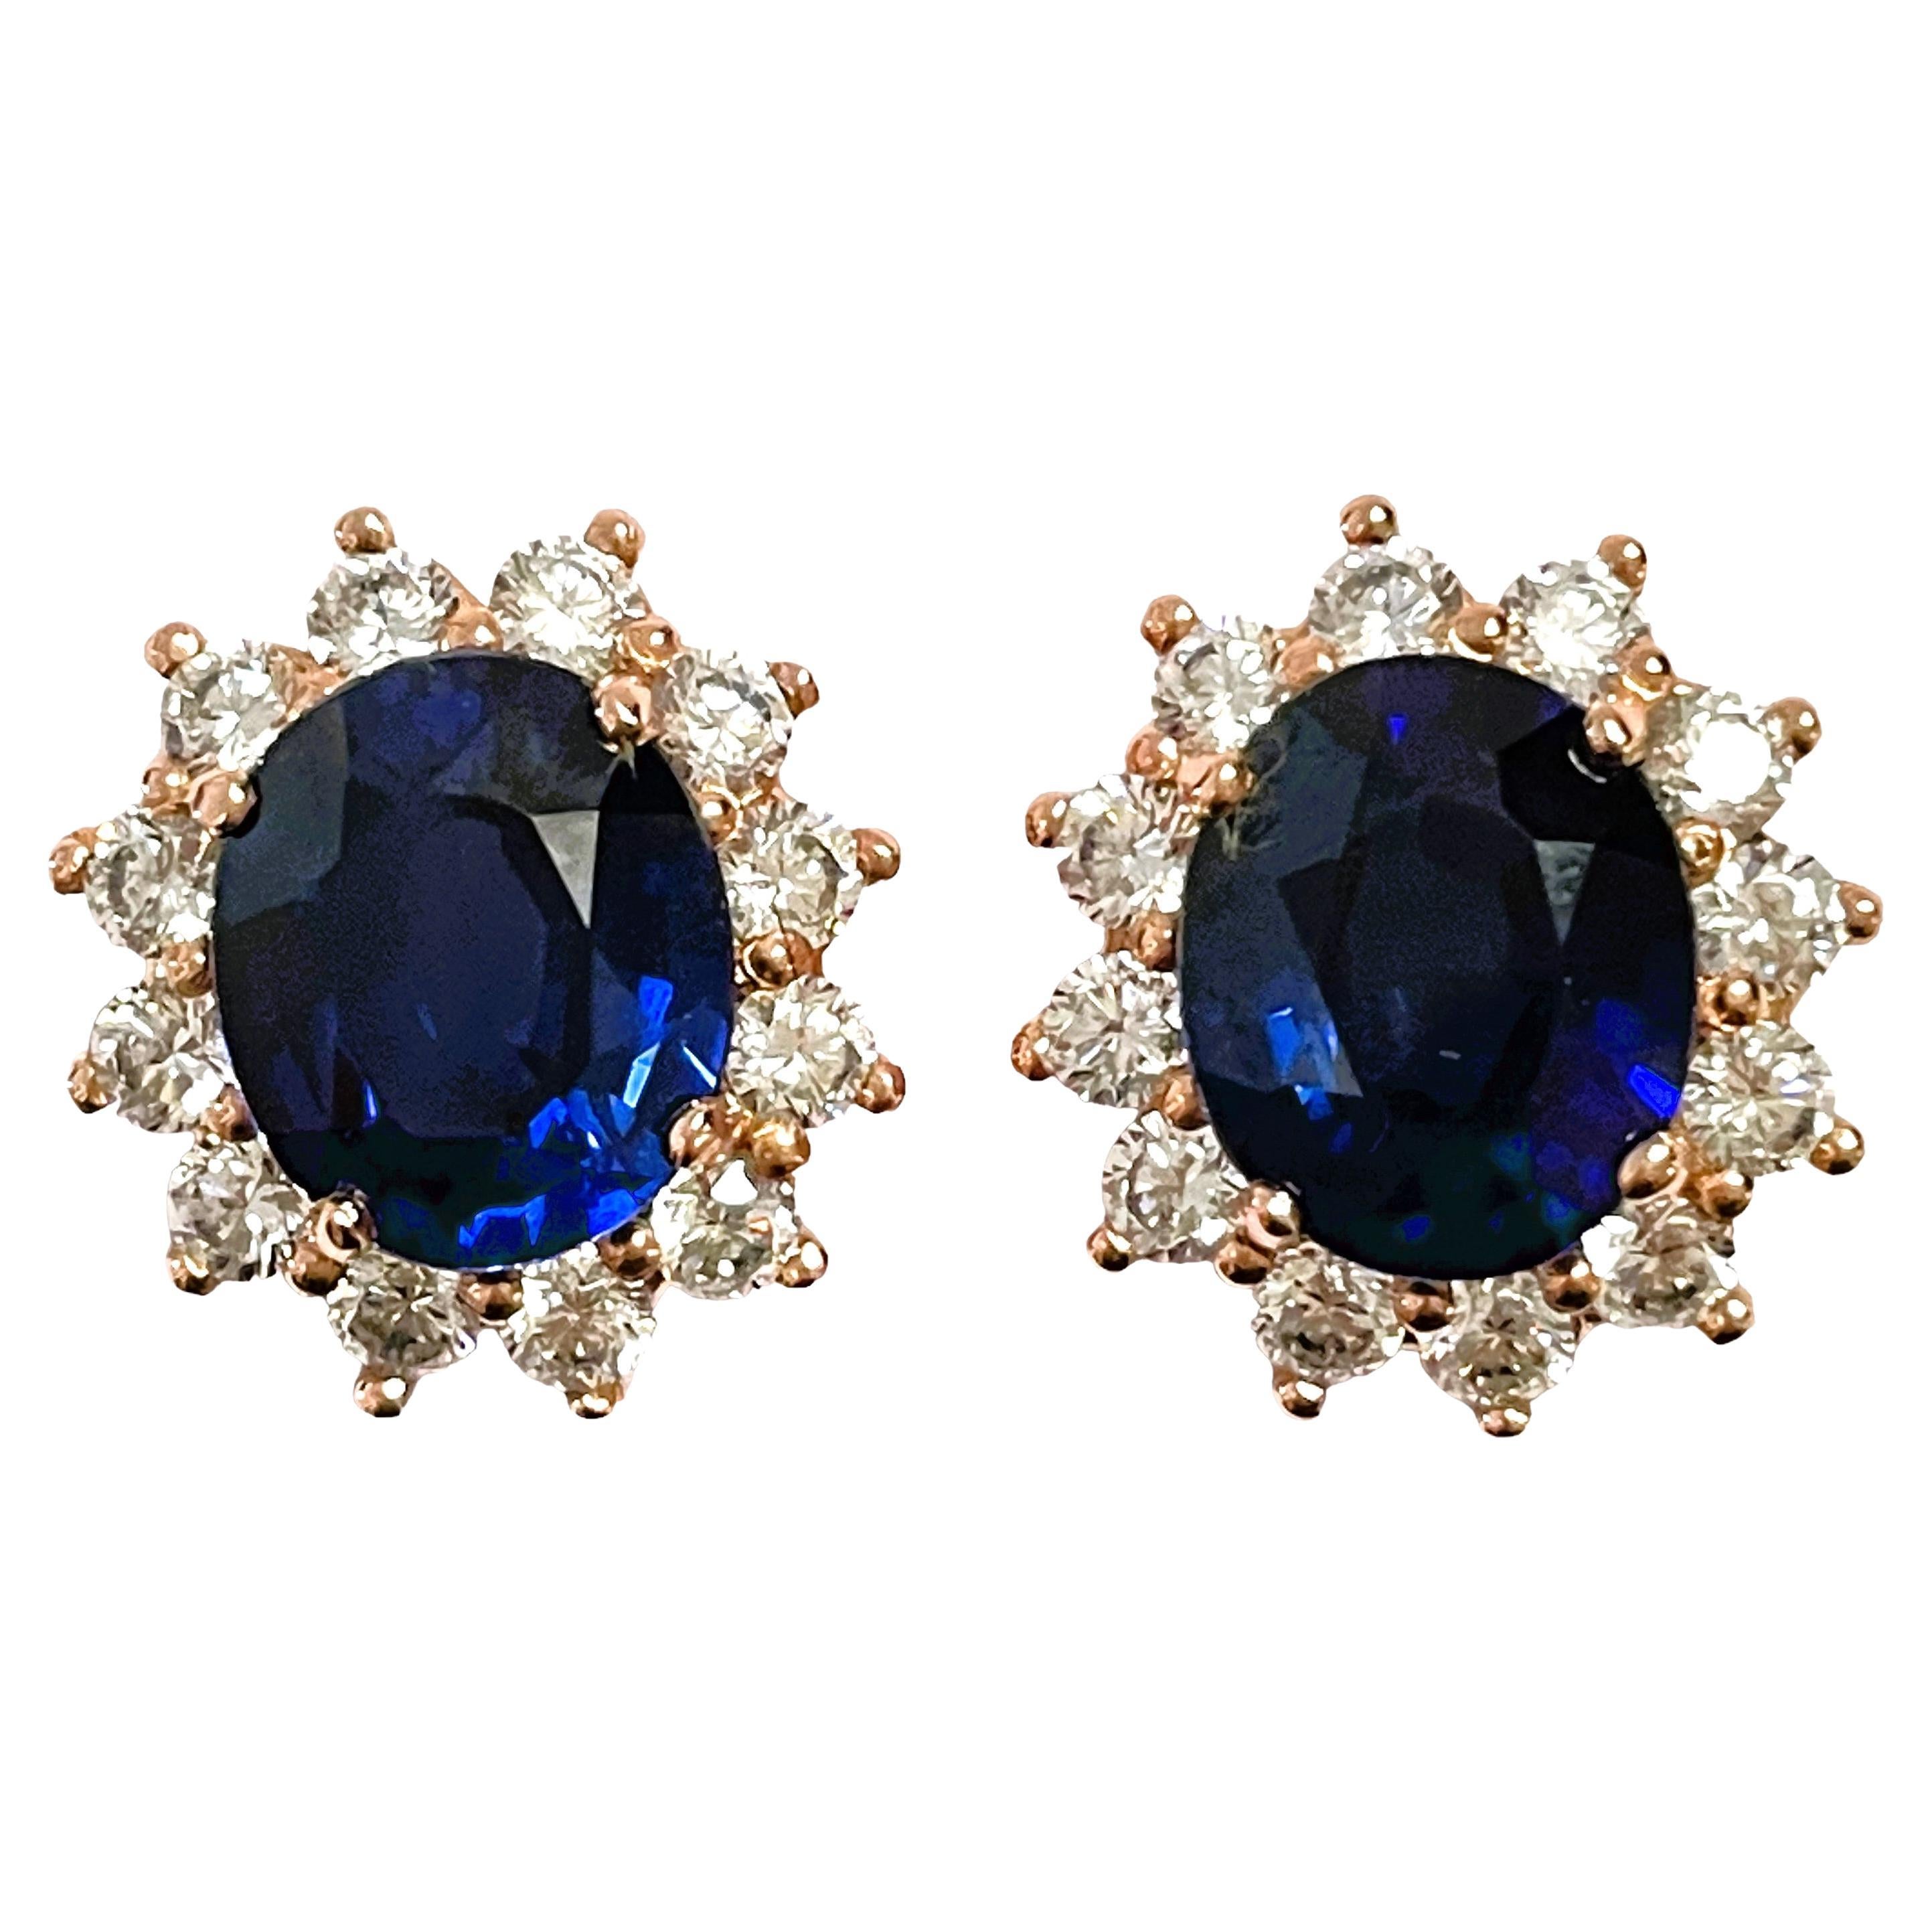 New African IF 8.7ct Kashmir Blue Sapphire Rgold Plated Sterling Post Earrings